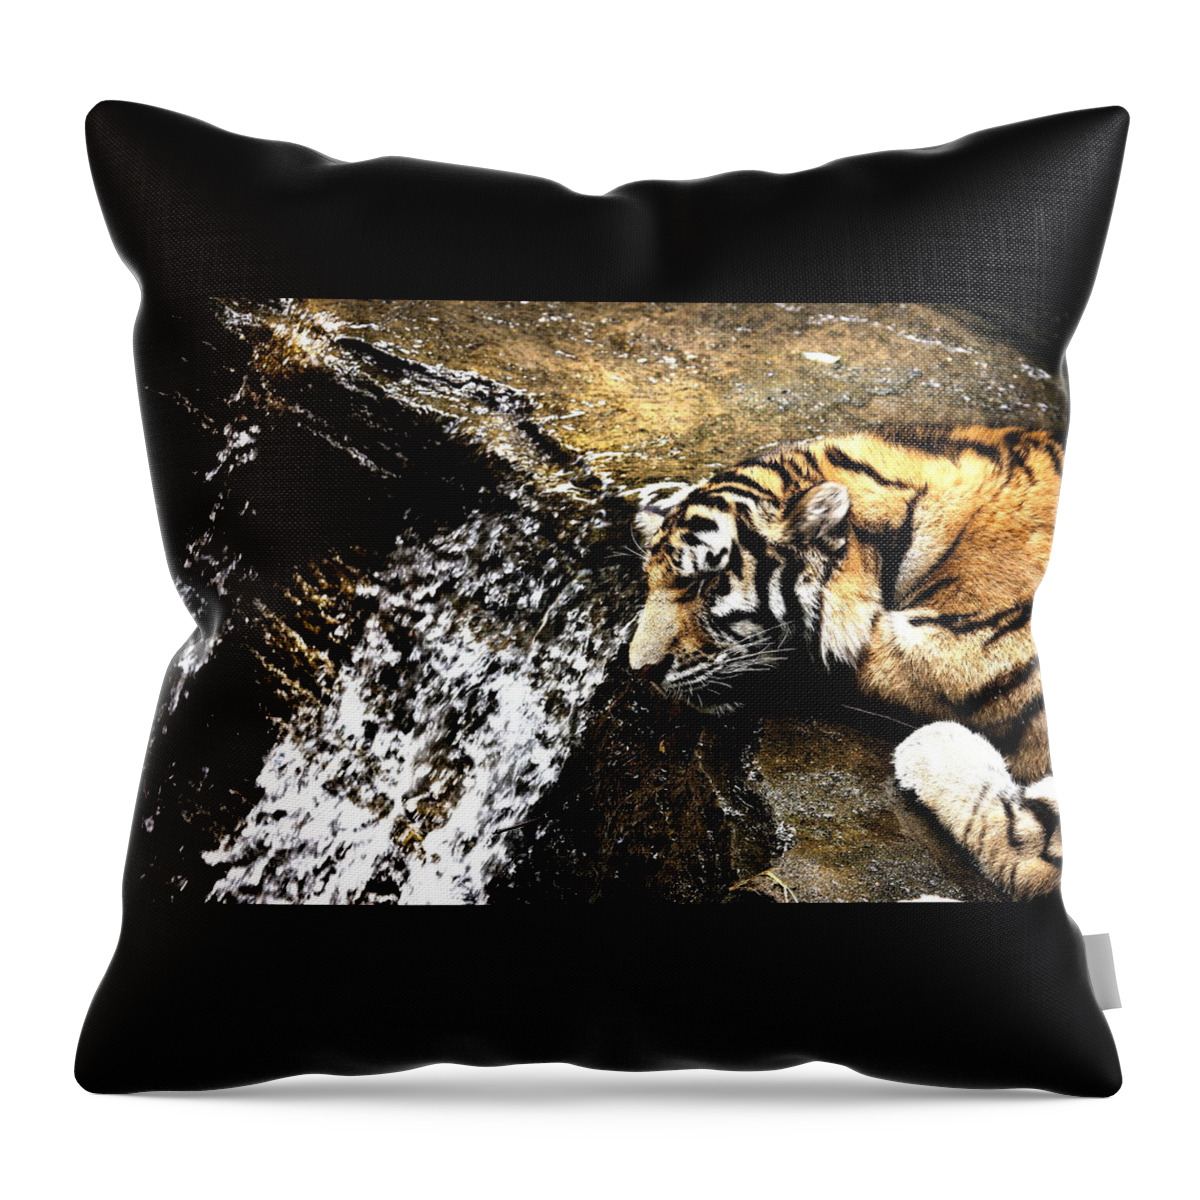 Amur Tiger Throw Pillow featuring the photograph Tiger Falls by Angela Rath